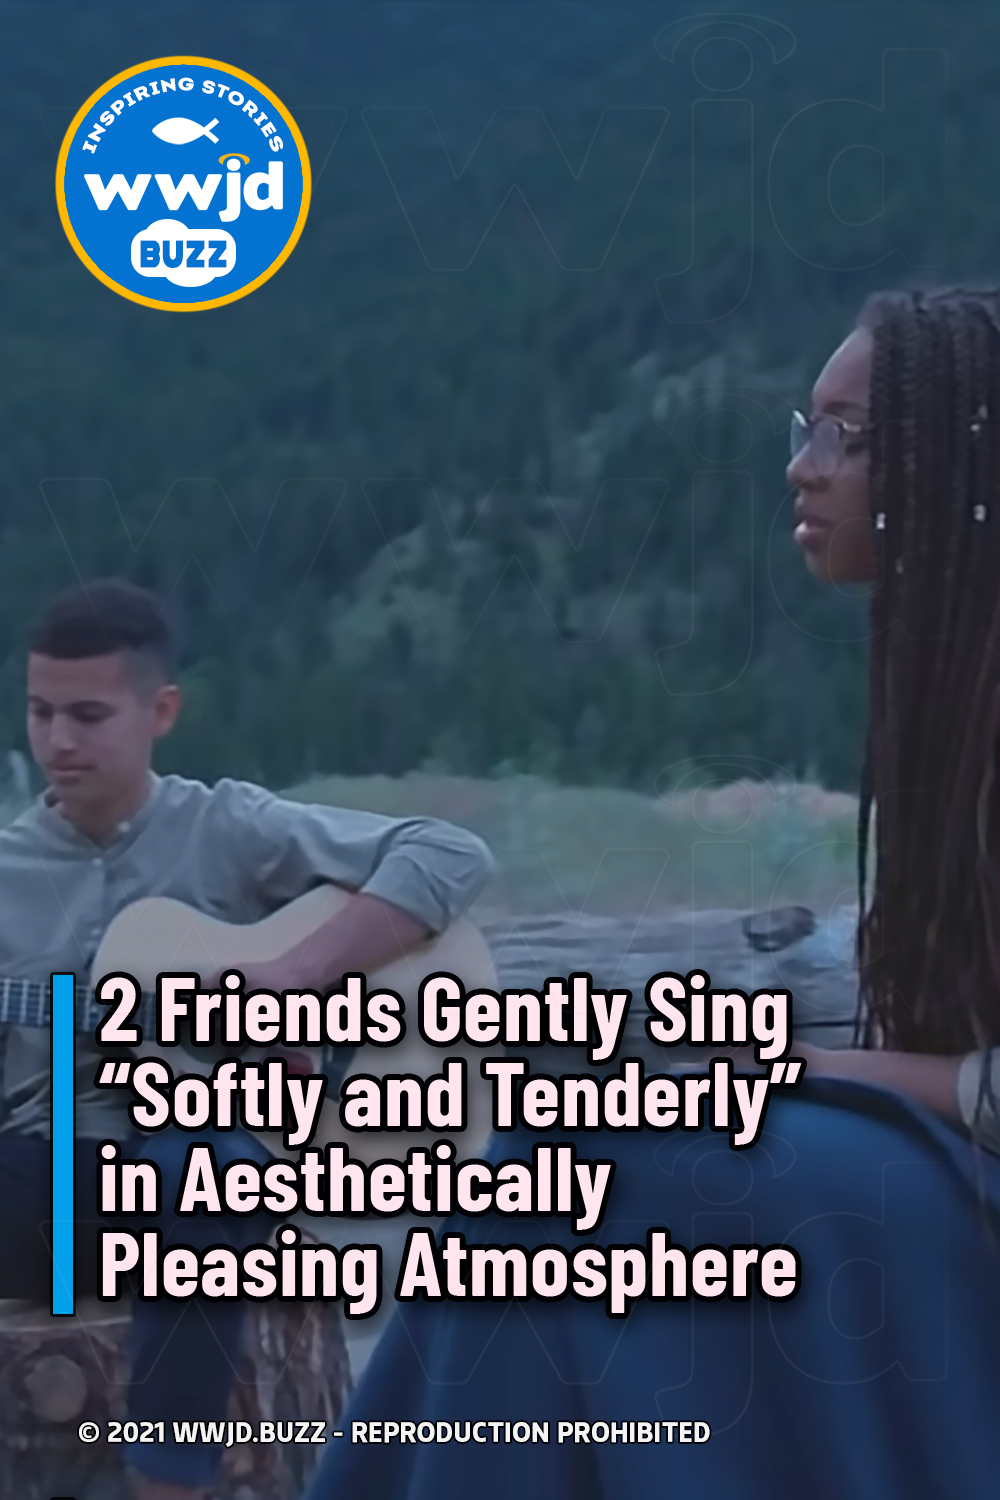 2 Friends Gently Sing “Softly and Tenderly” in Aesthetically Pleasing Atmosphere